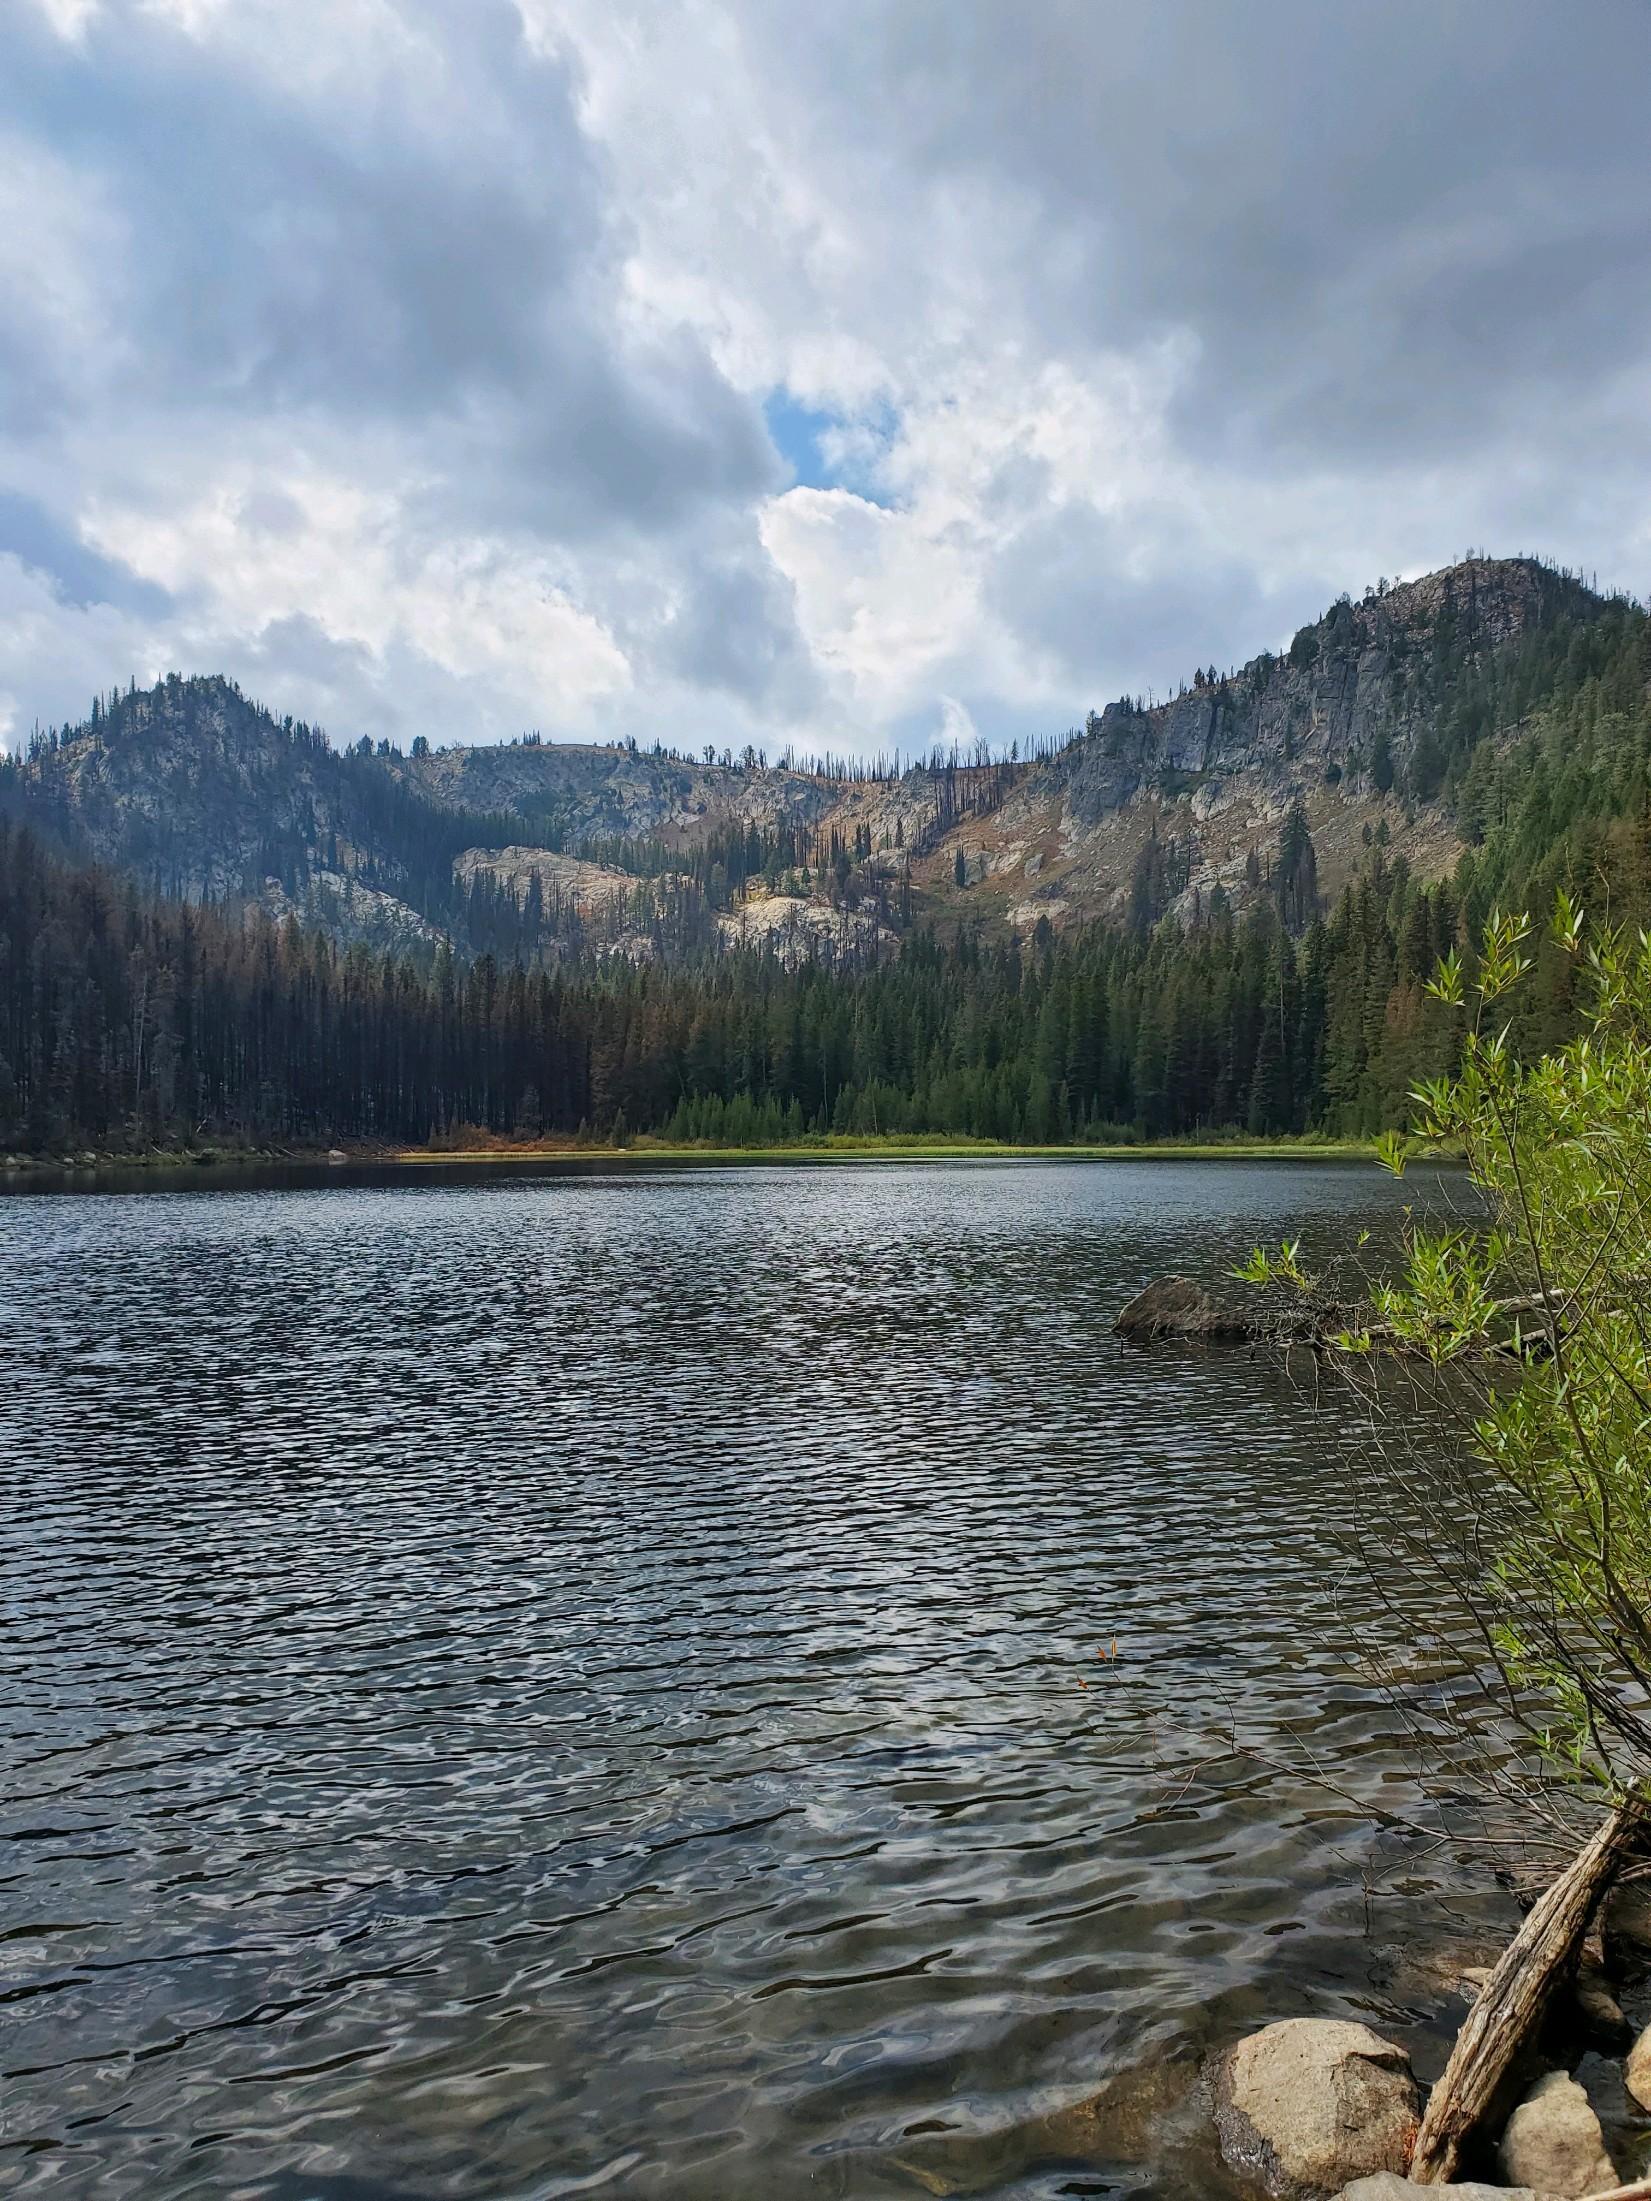 Skein Lake within the Four Corners Fire Area